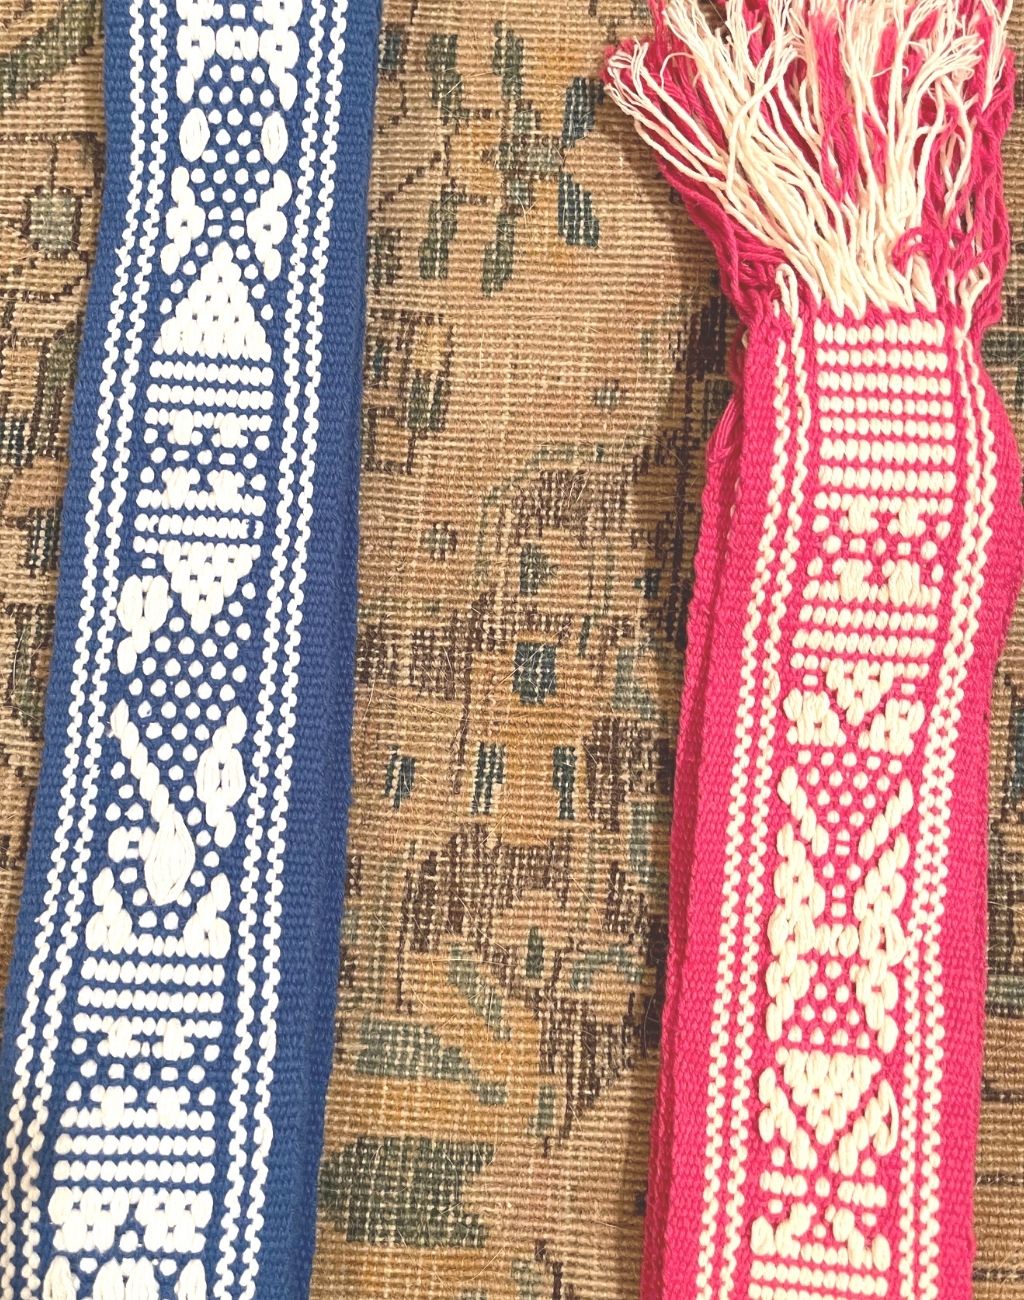 Hand Women Belts made by Female Artisans in Mexico | Blue or Fuchsia - Visit Nifty Mexican artisans 